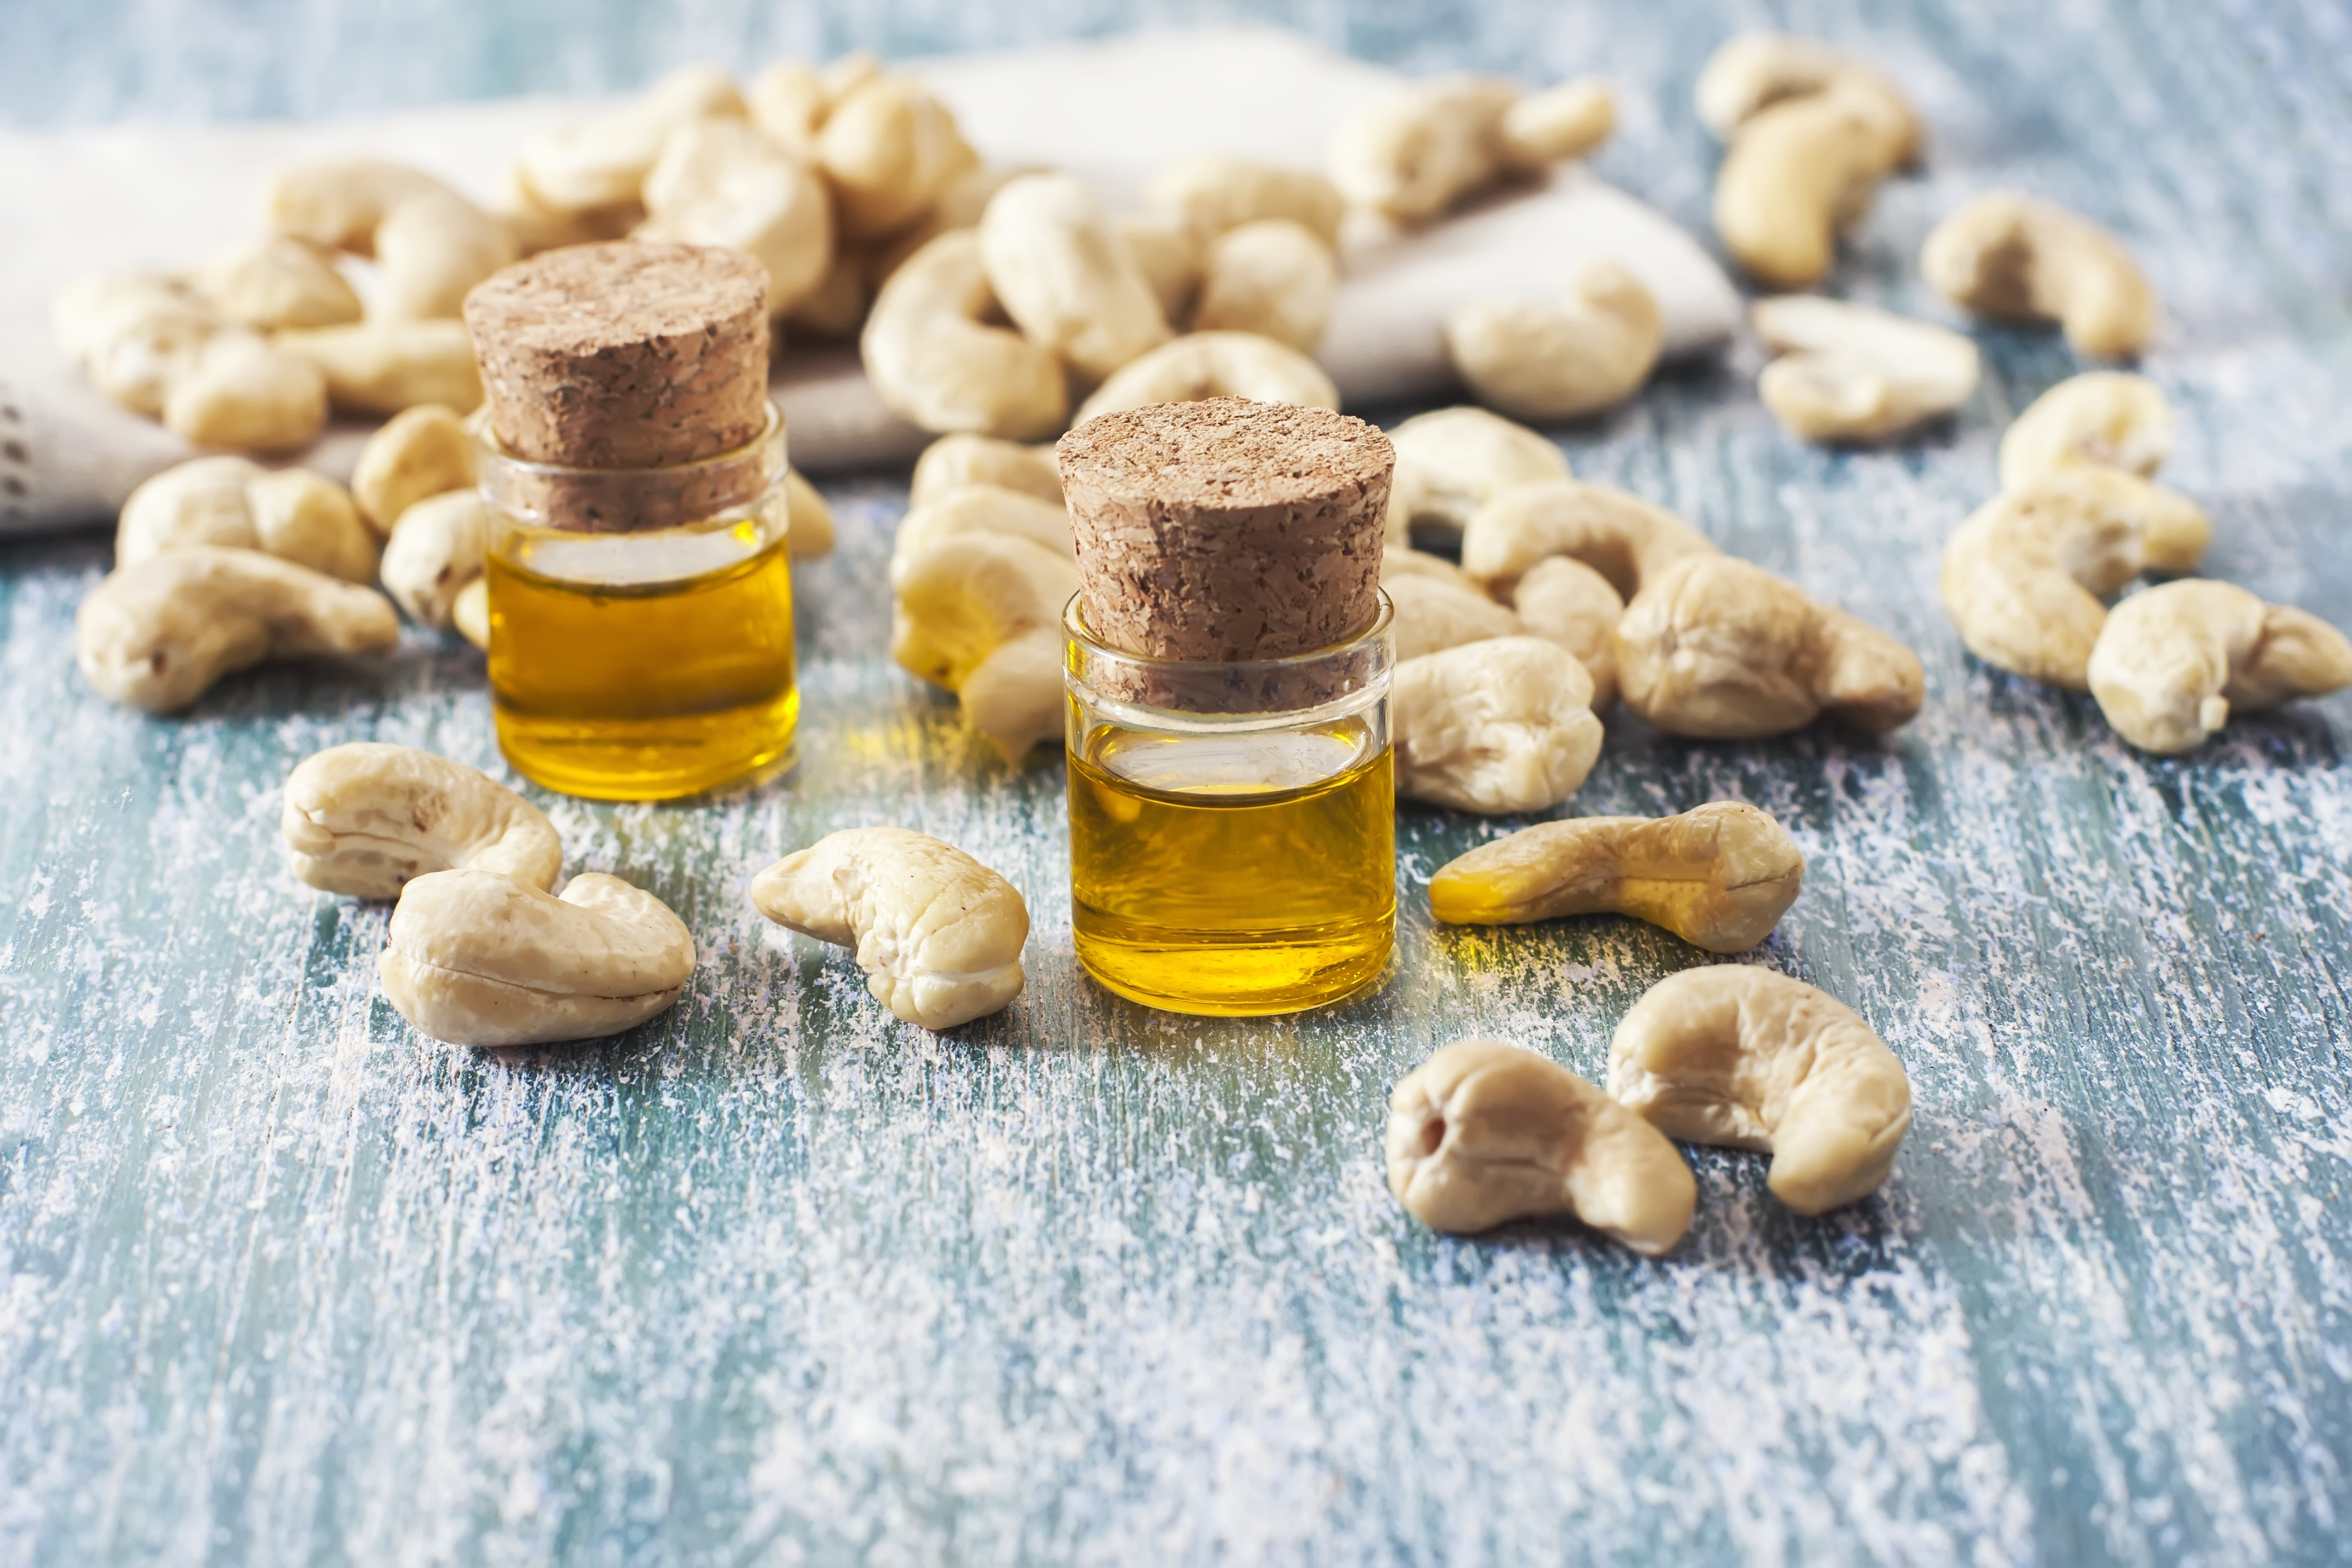 cashew nuts and oil in bottle on wooden background. Selective focus